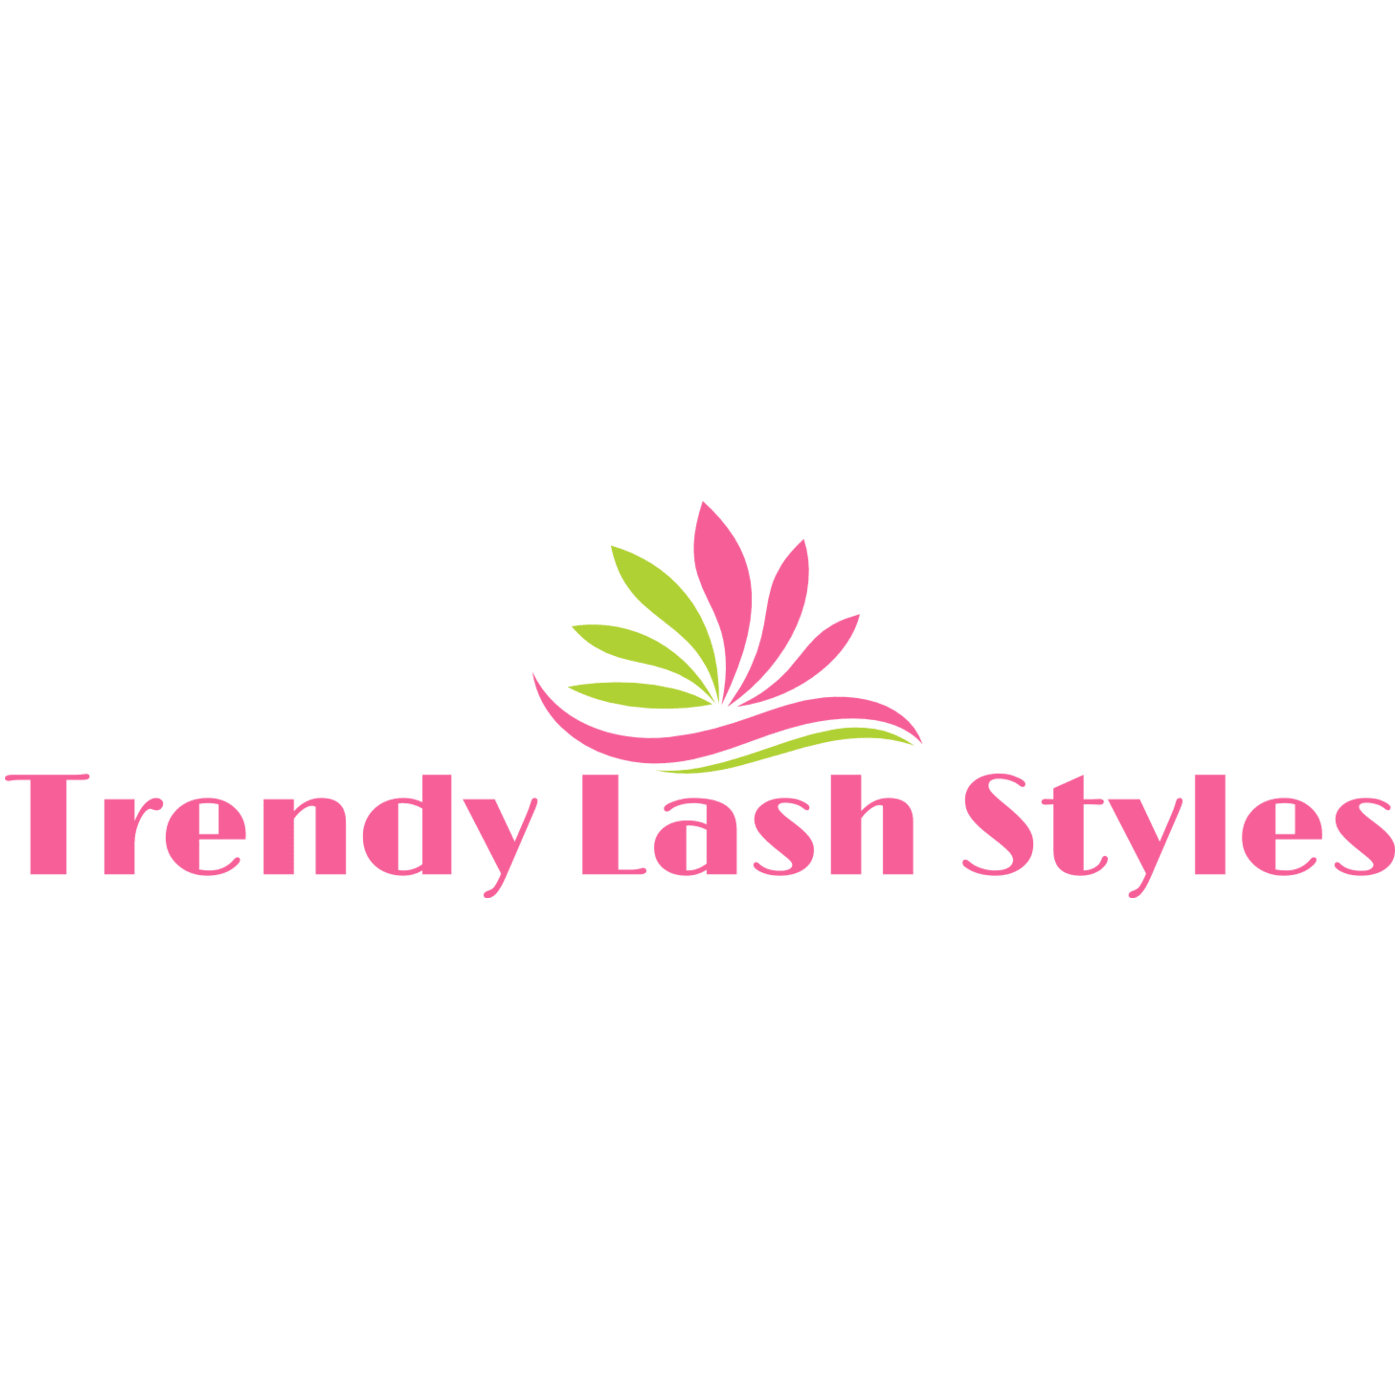 Trendy Lash Styles - Clearwater, FL 33761 - (727)669-3232 | ShowMeLocal.com